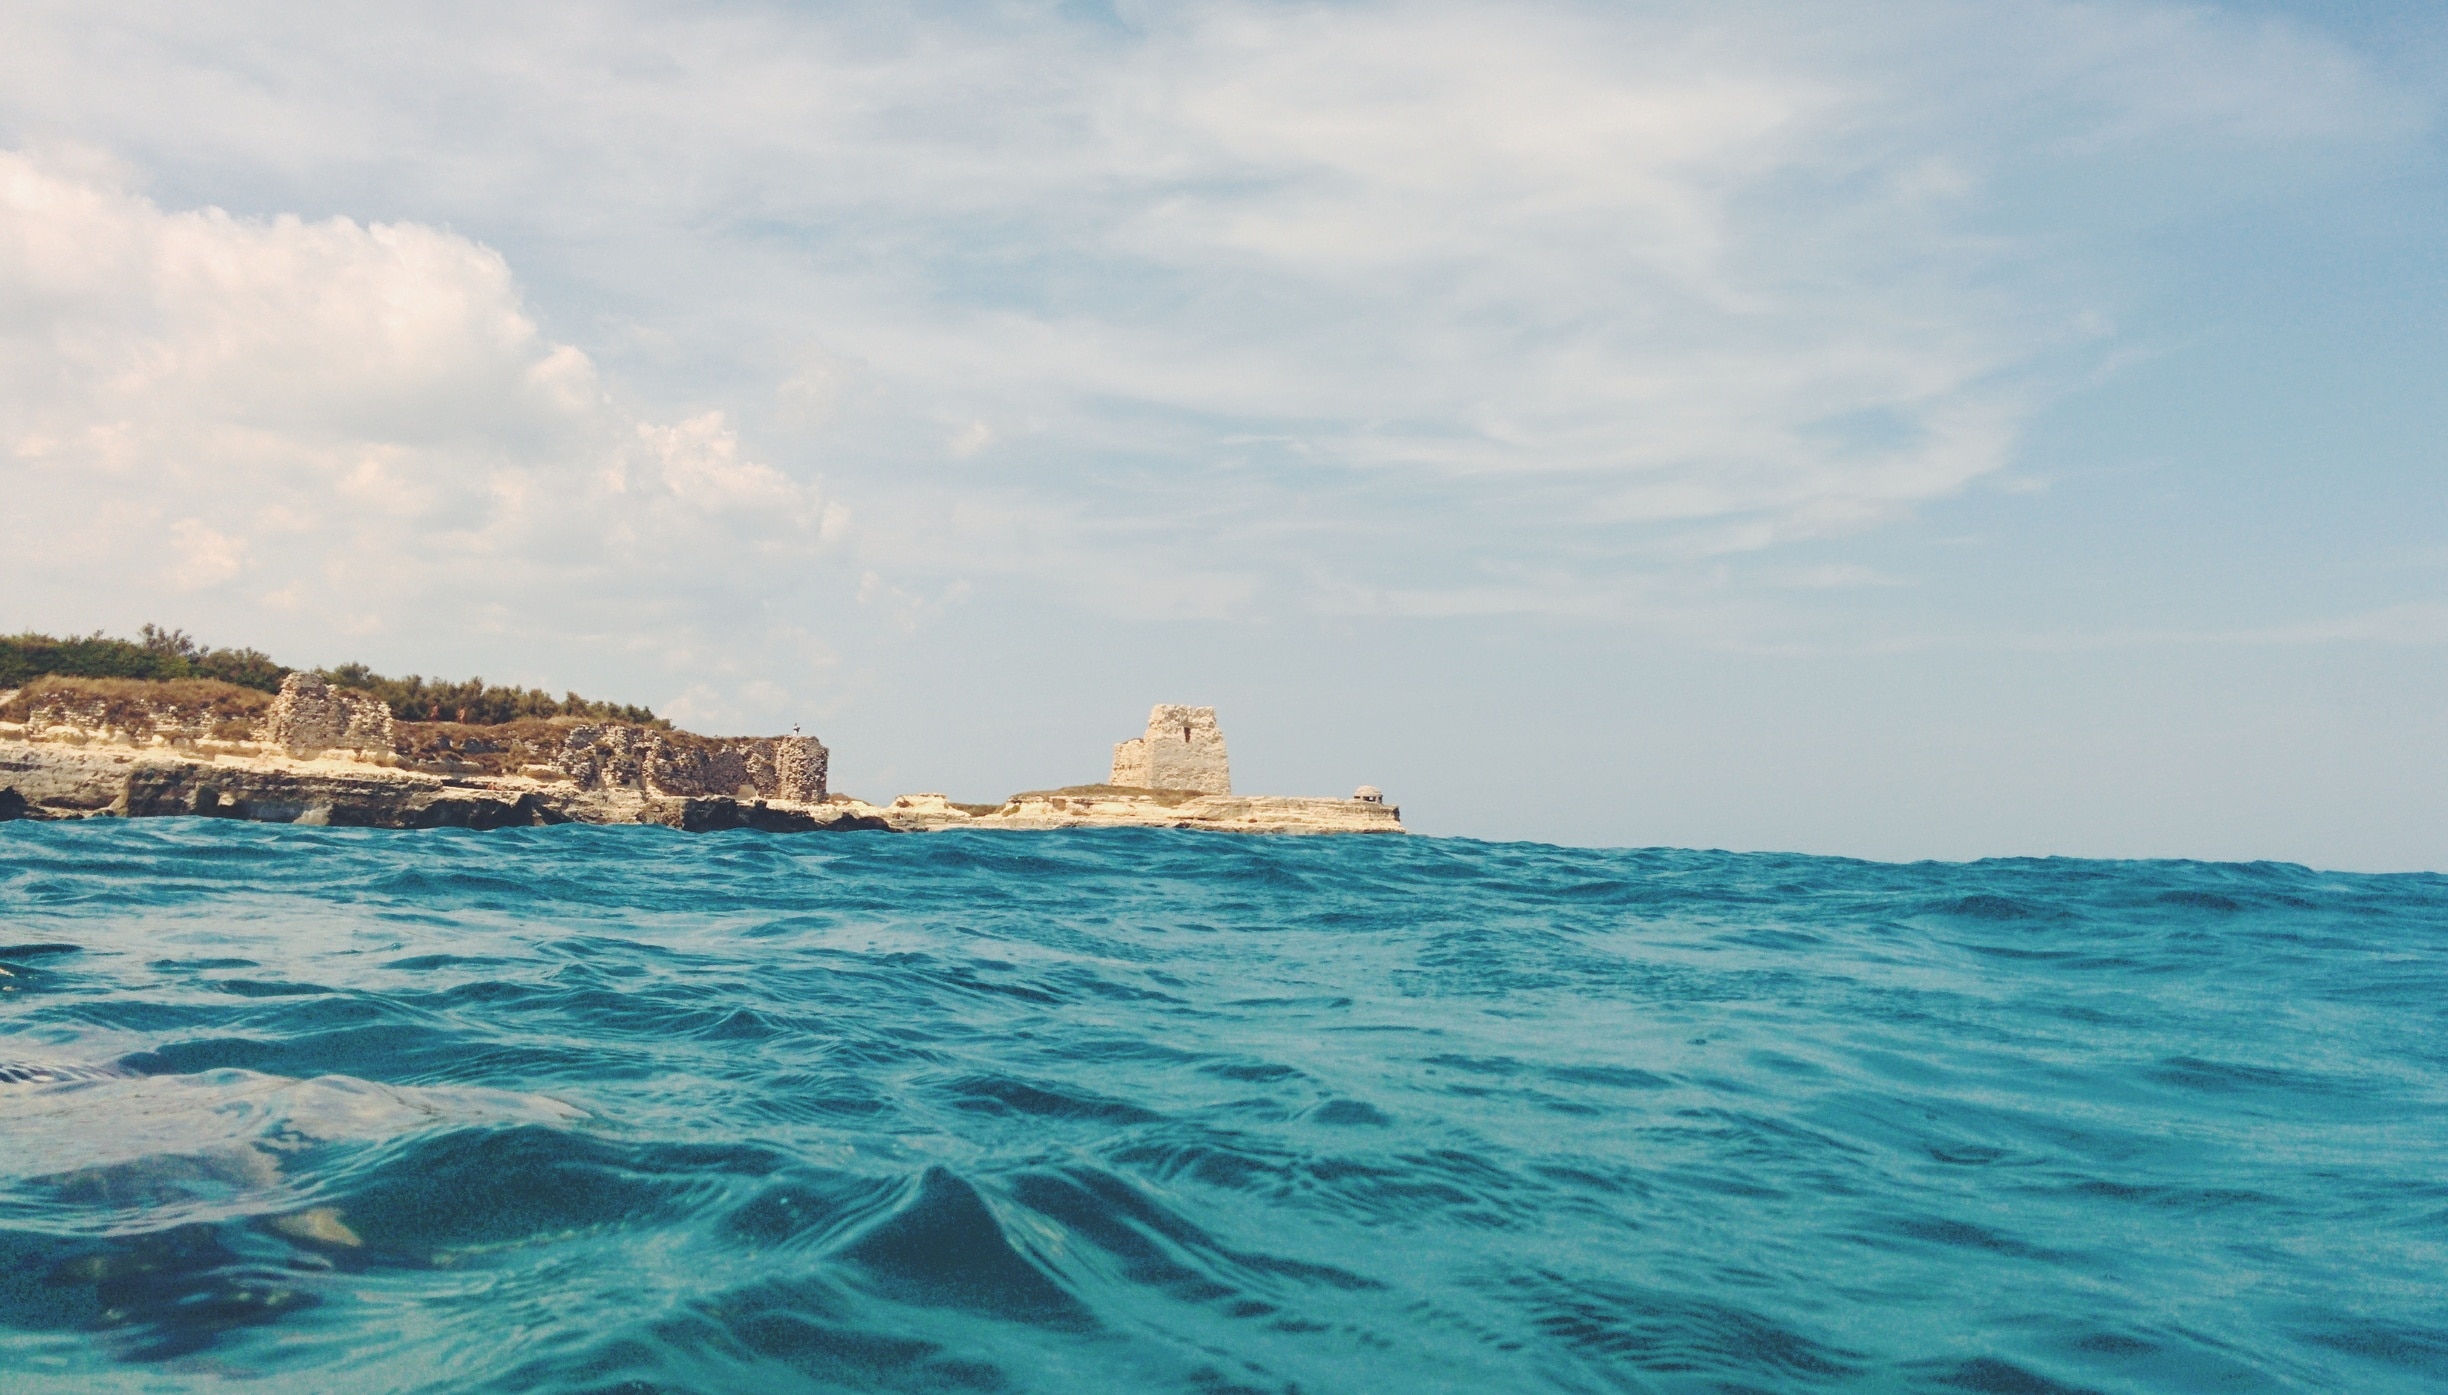 Direclty from the #water: a view of Roca Vecchia's tower! #colorful #sea #blue